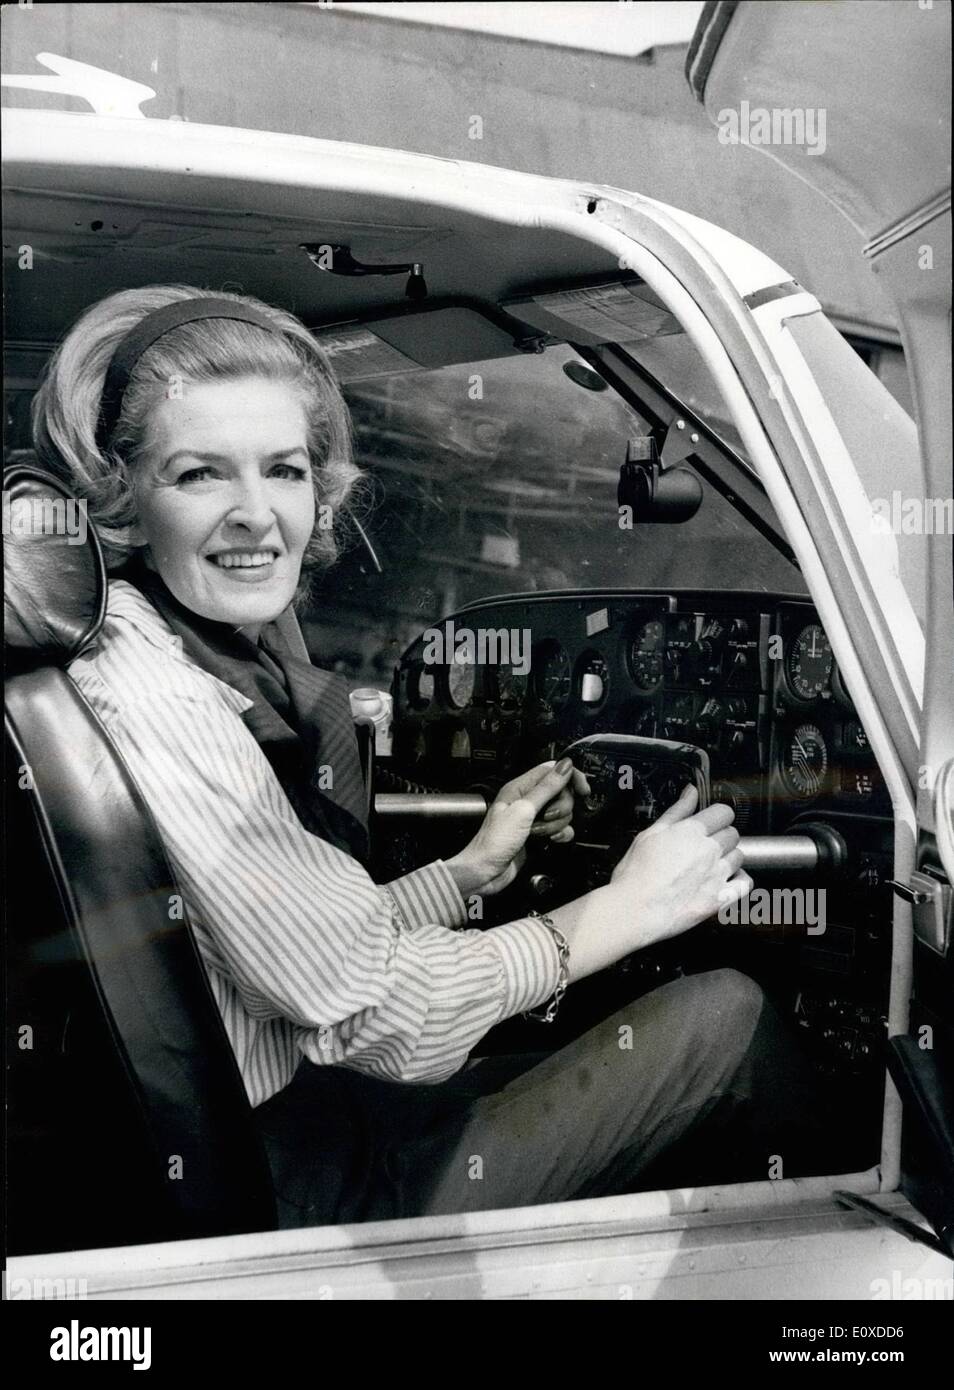 May 05, 1966 - Woman Pilot Makes Test Flight In Plane On Which She Plans World Flight: The racing and ferry pilot, Miss Sheila Scott, who plans to leave at the end of the week on a 30,000 miles in a single-engined light aircraft - was today checking and testing her aircraft at Leavedon Airport, Herts. Miss Scott hopes to complete the flight in 27 days - in her Comanche 260B aircraft. Photo Shows Miss Sheila Scott pictured at The controls of her aircraft's today. Stock Photo